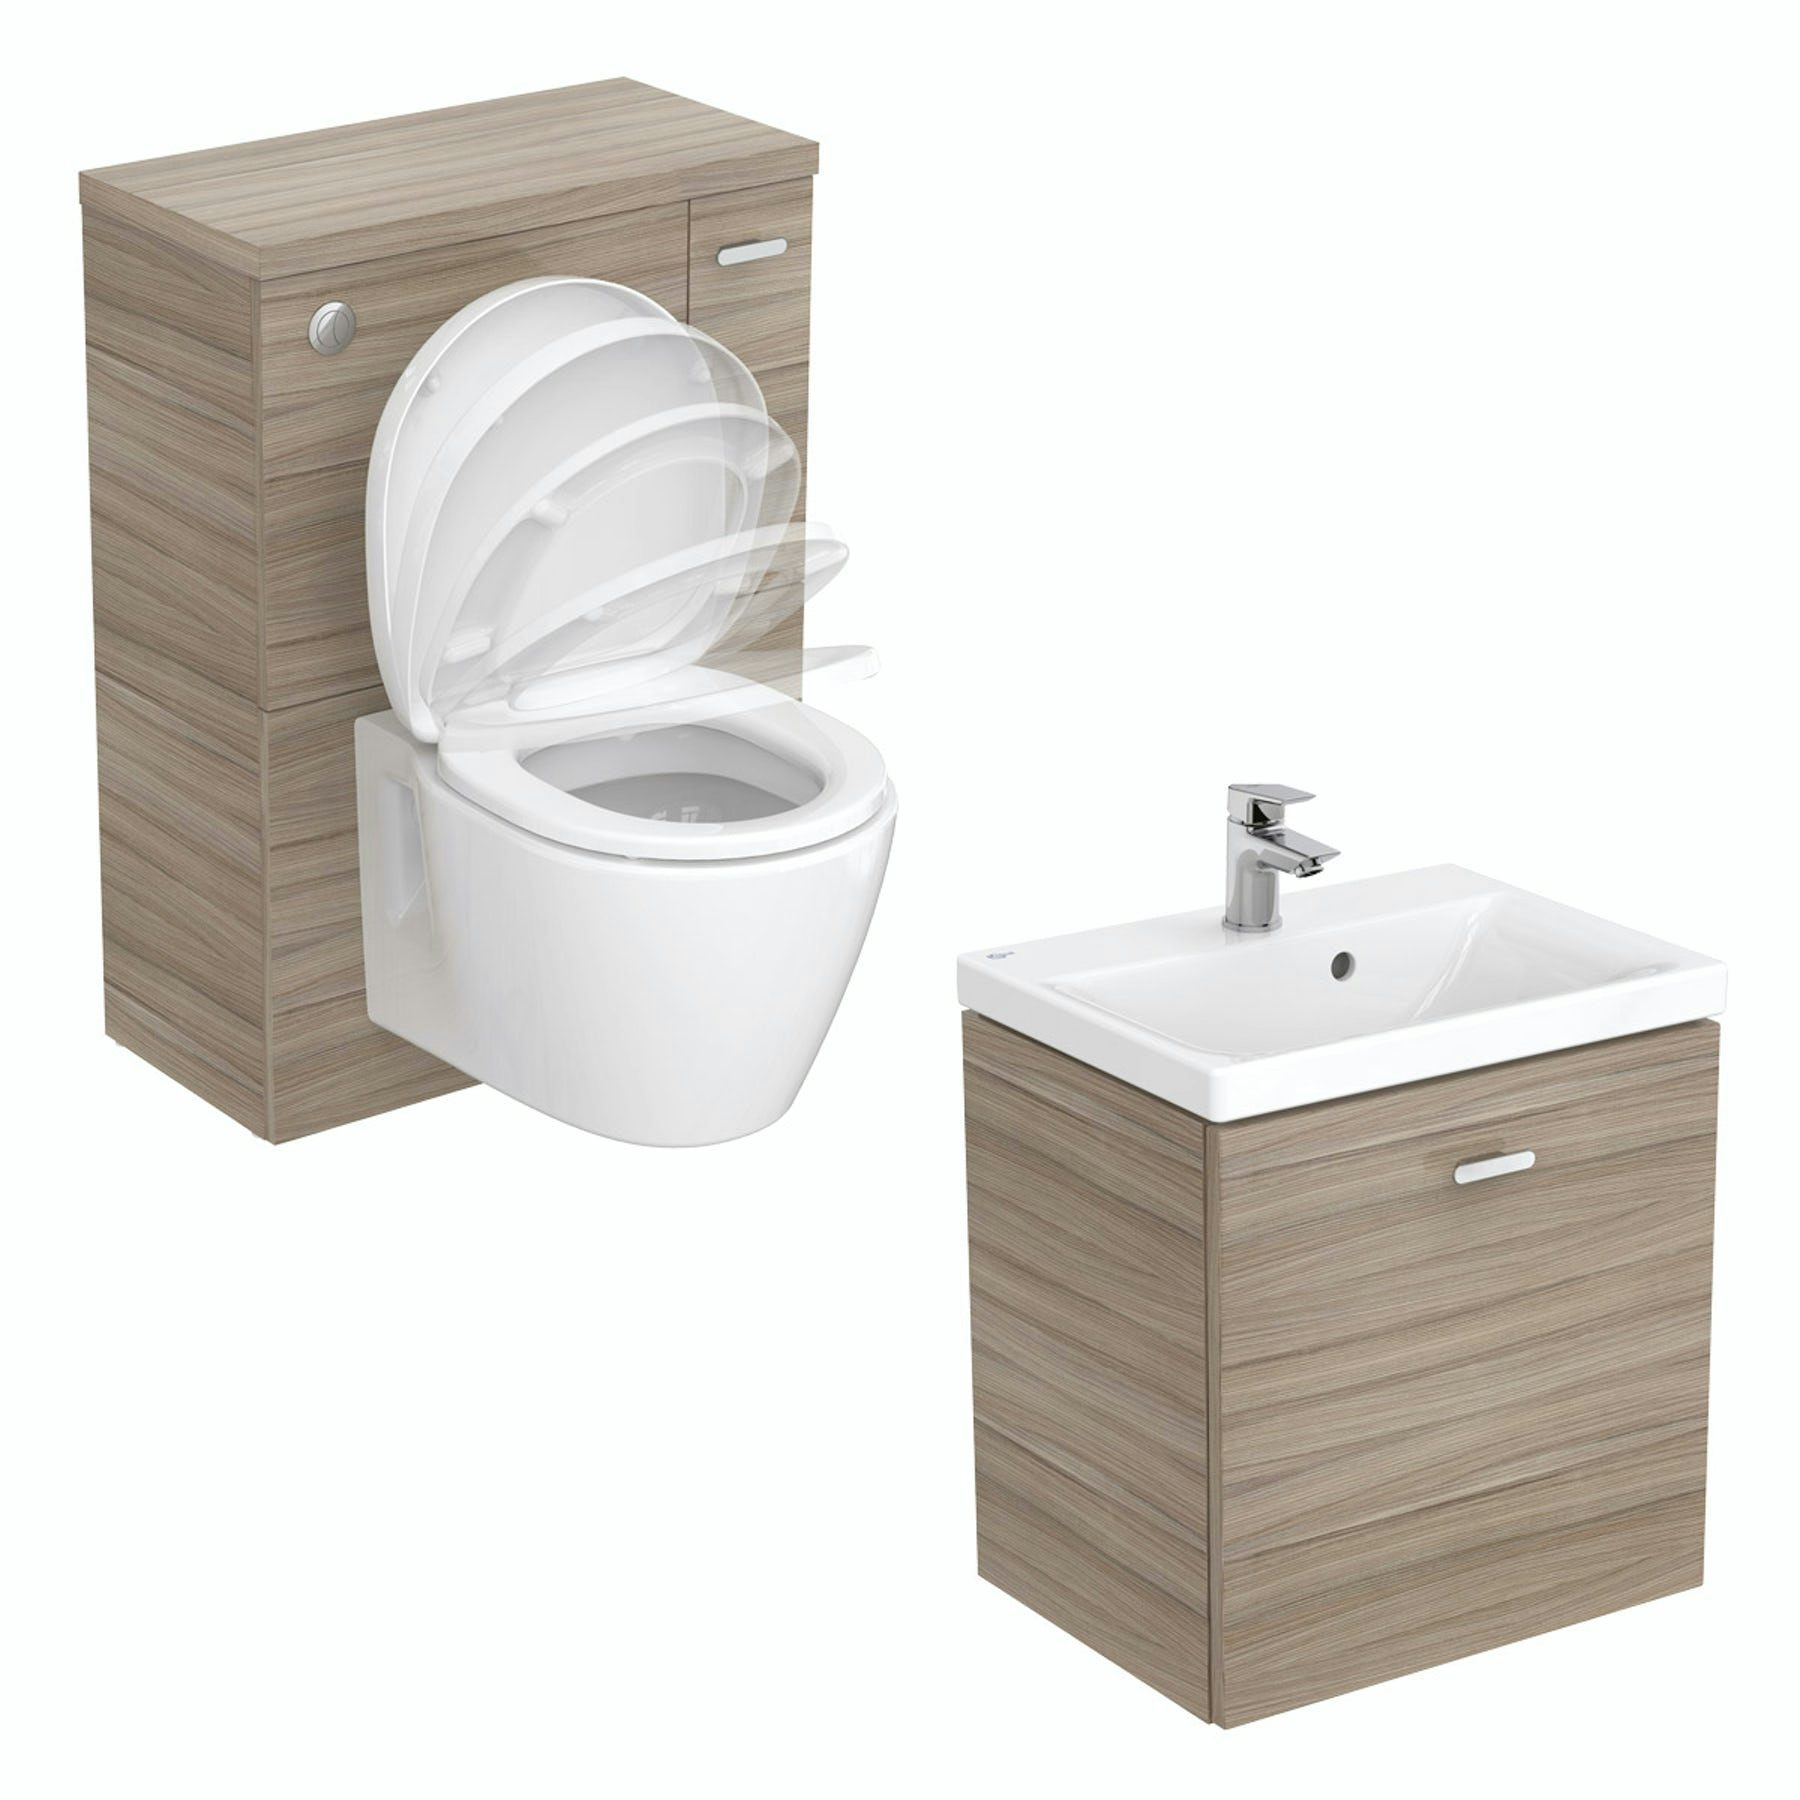 Ideal Standard Concept Space elm wall hung vanity unit with back to wall unit, toilet and seat